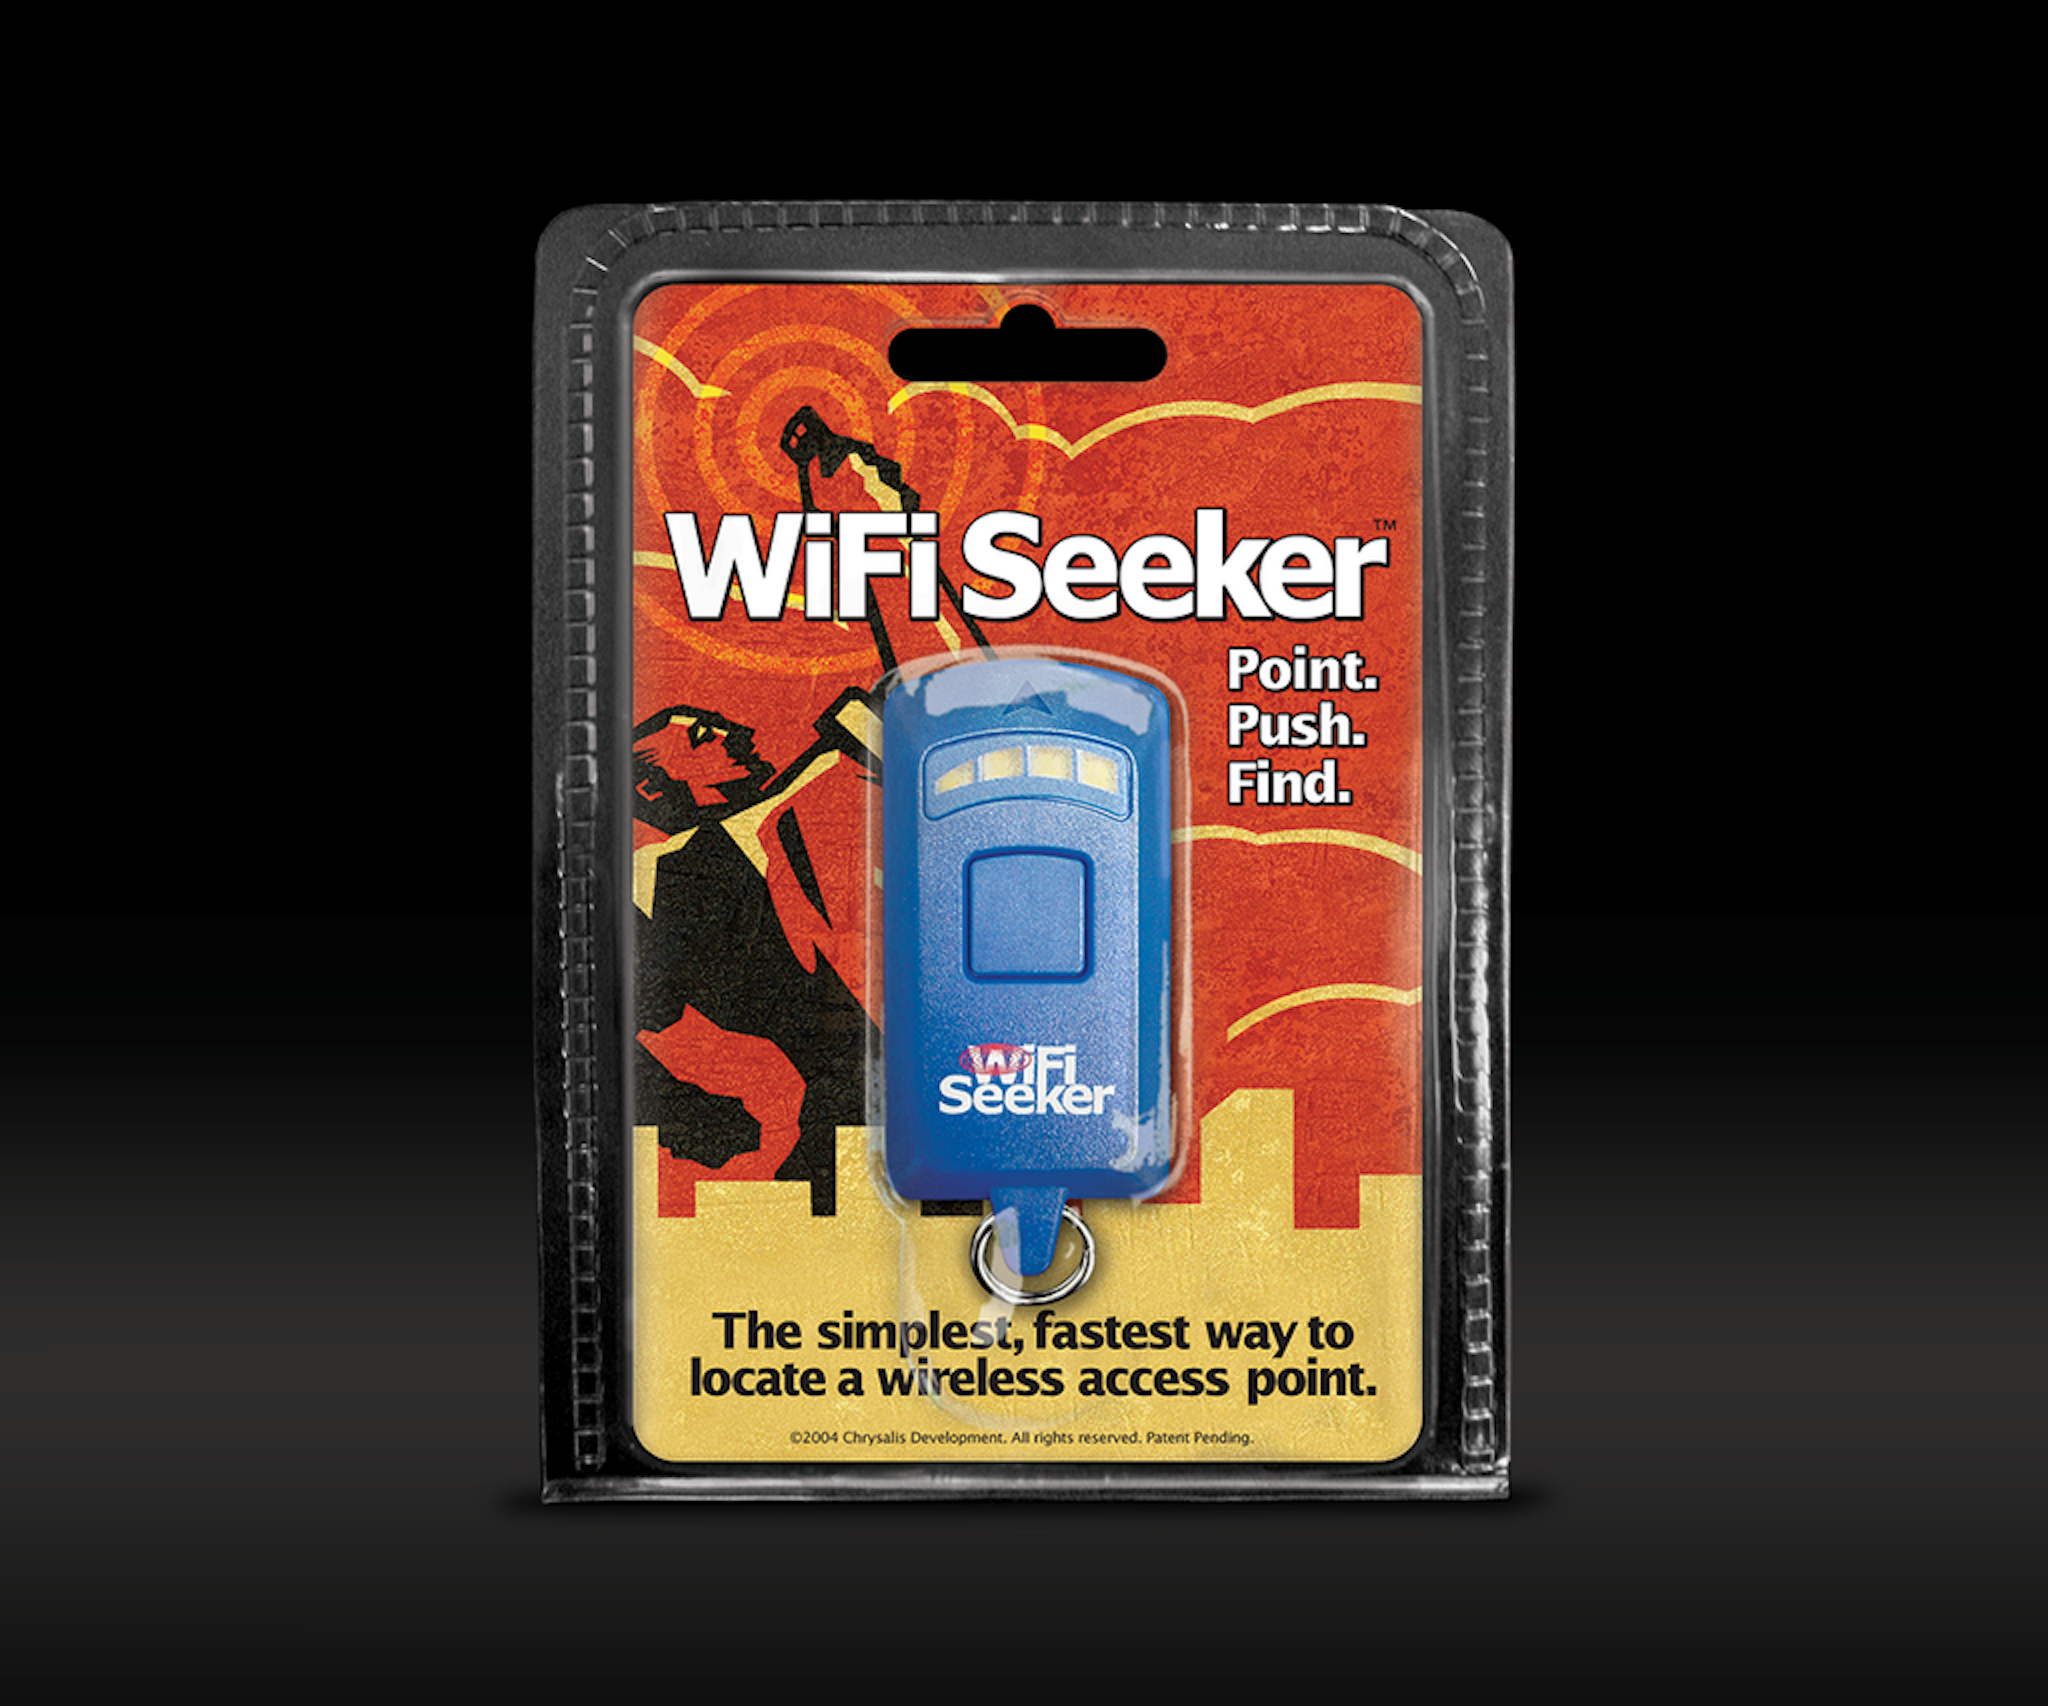 Key fob WiFi signal finder branding and packaging